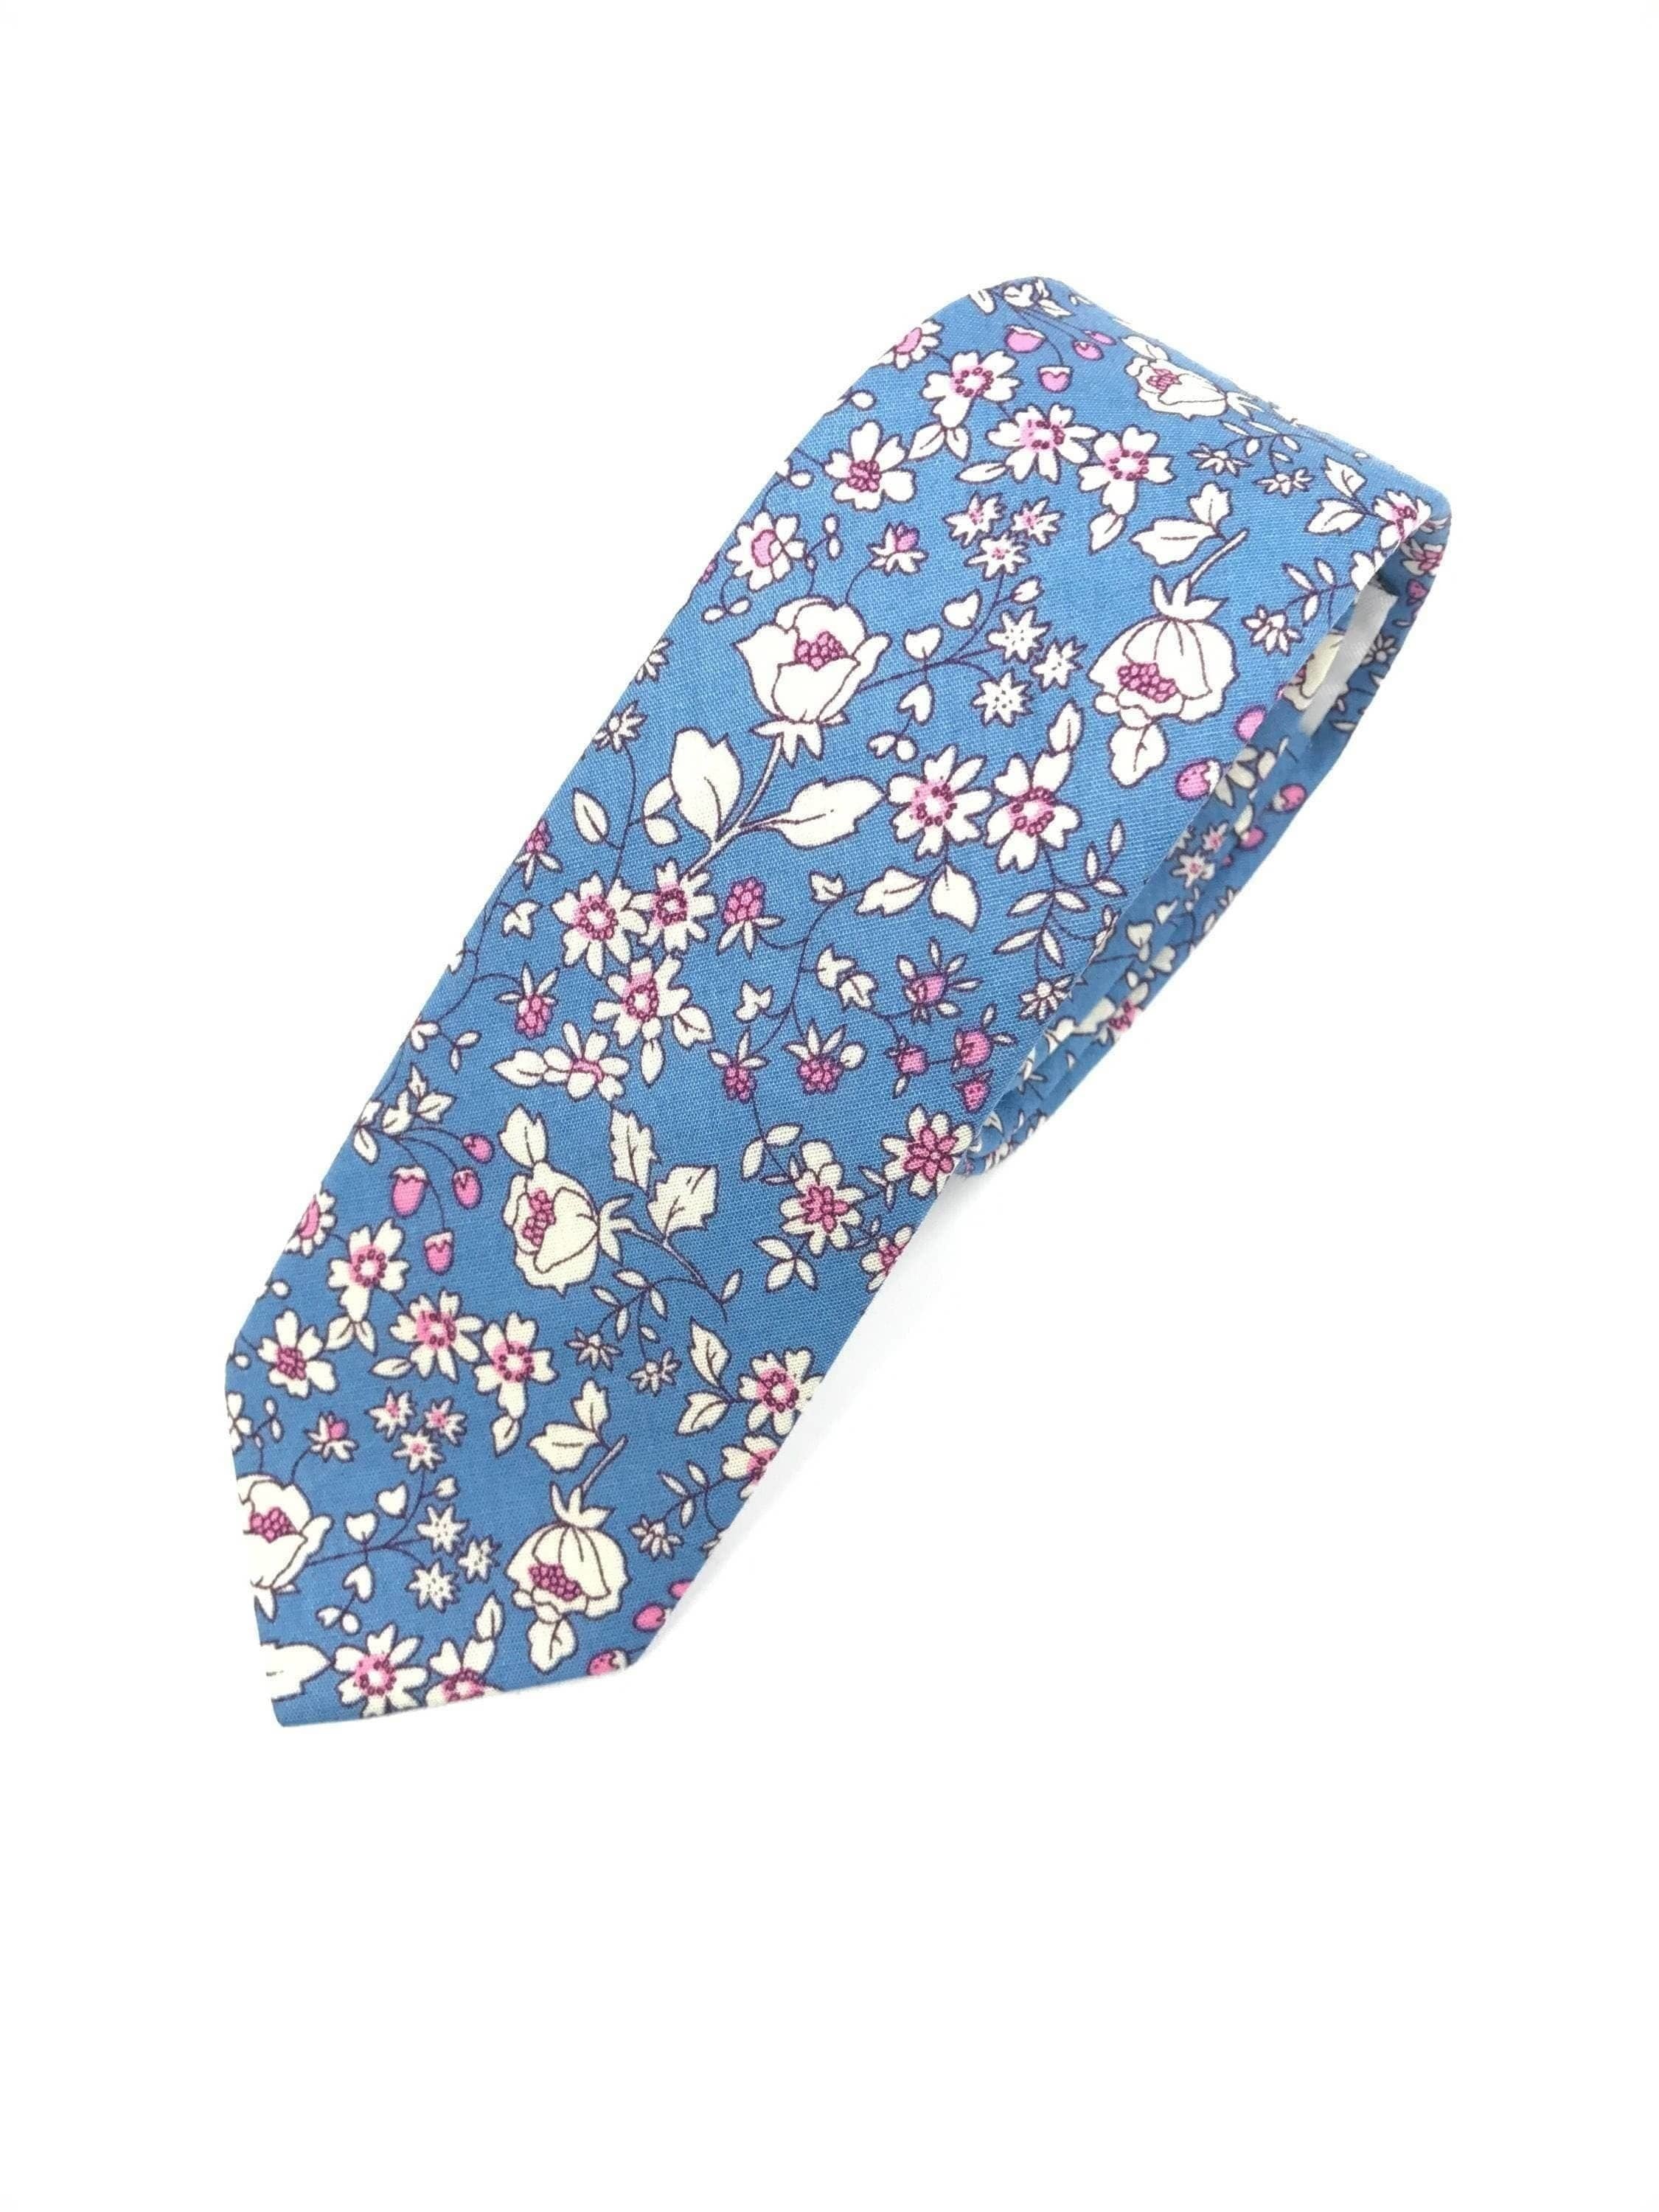 Light Blue Floral Tie Retro 2.36&quot; Mytieshop - DAISY-Neckties-Light Blue Floral Tie Retro 2.36&quot; Mytieshop DAISY for weddings and events, great for prom and anniversary gifts. Mens floral ties near me us ties-Mytieshop. Skinny ties for weddings anniversaries. Father of bride. Groomsmen. Cool skinny neckties for men. Neckwear for prom, missions and fancy events. Gift ideas for men. Anniversaries ideas. Wedding aesthetics. Flower ties. Dry flower ties.